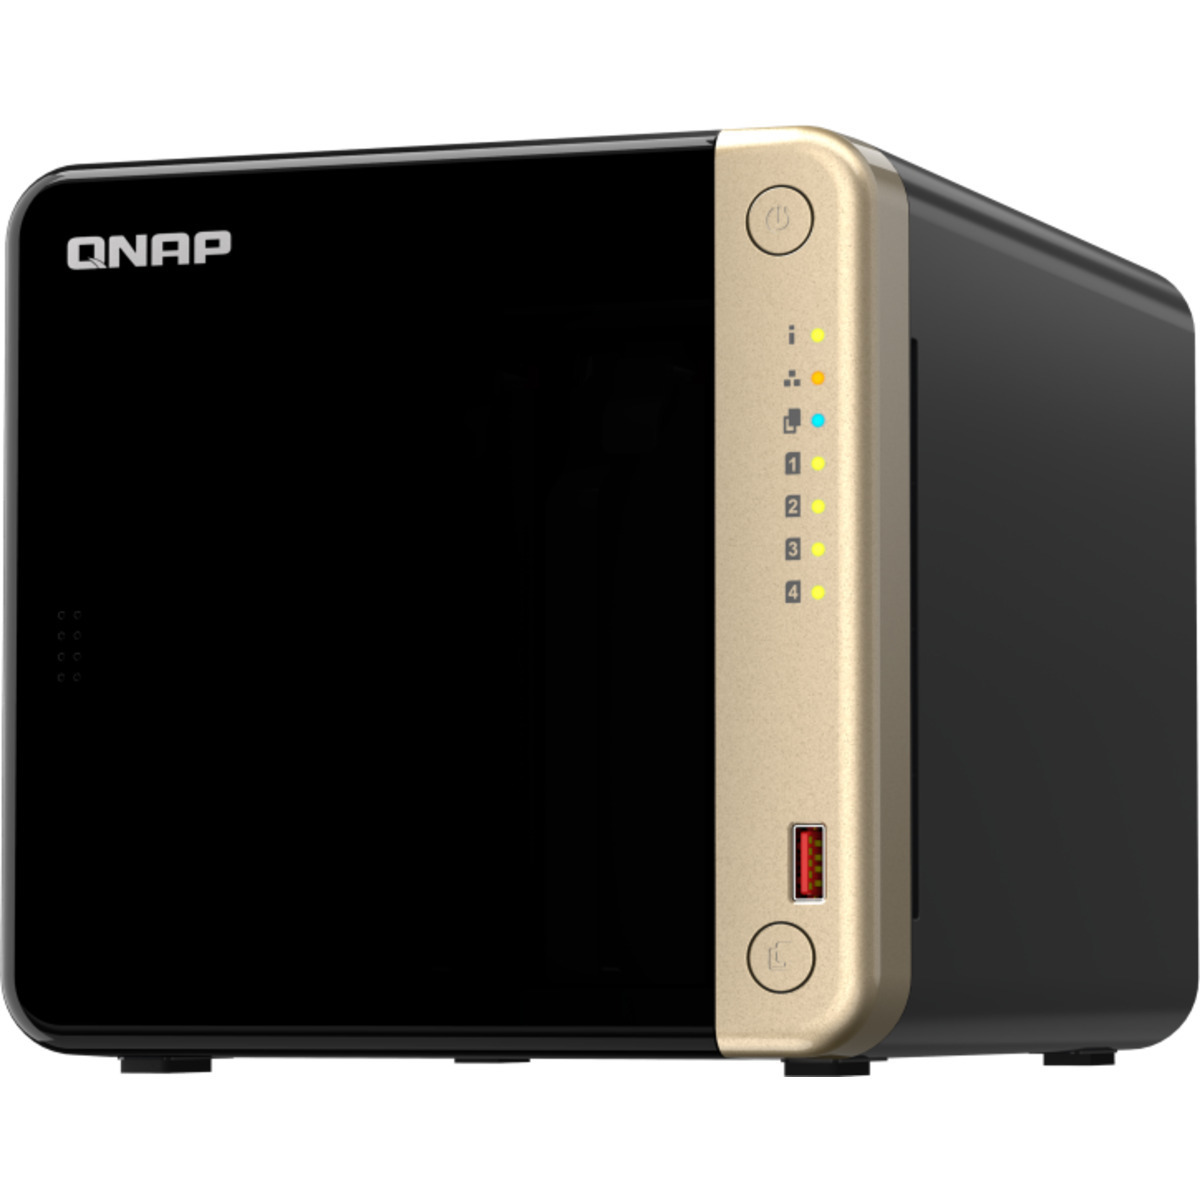 QNAP TS-464 64tb 4-Bay Desktop Multimedia / Power User / Business NAS - Network Attached Storage Device 4x16tb Seagate IronWolf Pro ST16000NT001 3.5 7200rpm SATA 6Gb/s HDD NAS Class Drives Installed - Burn-In Tested - ON SALE TS-464